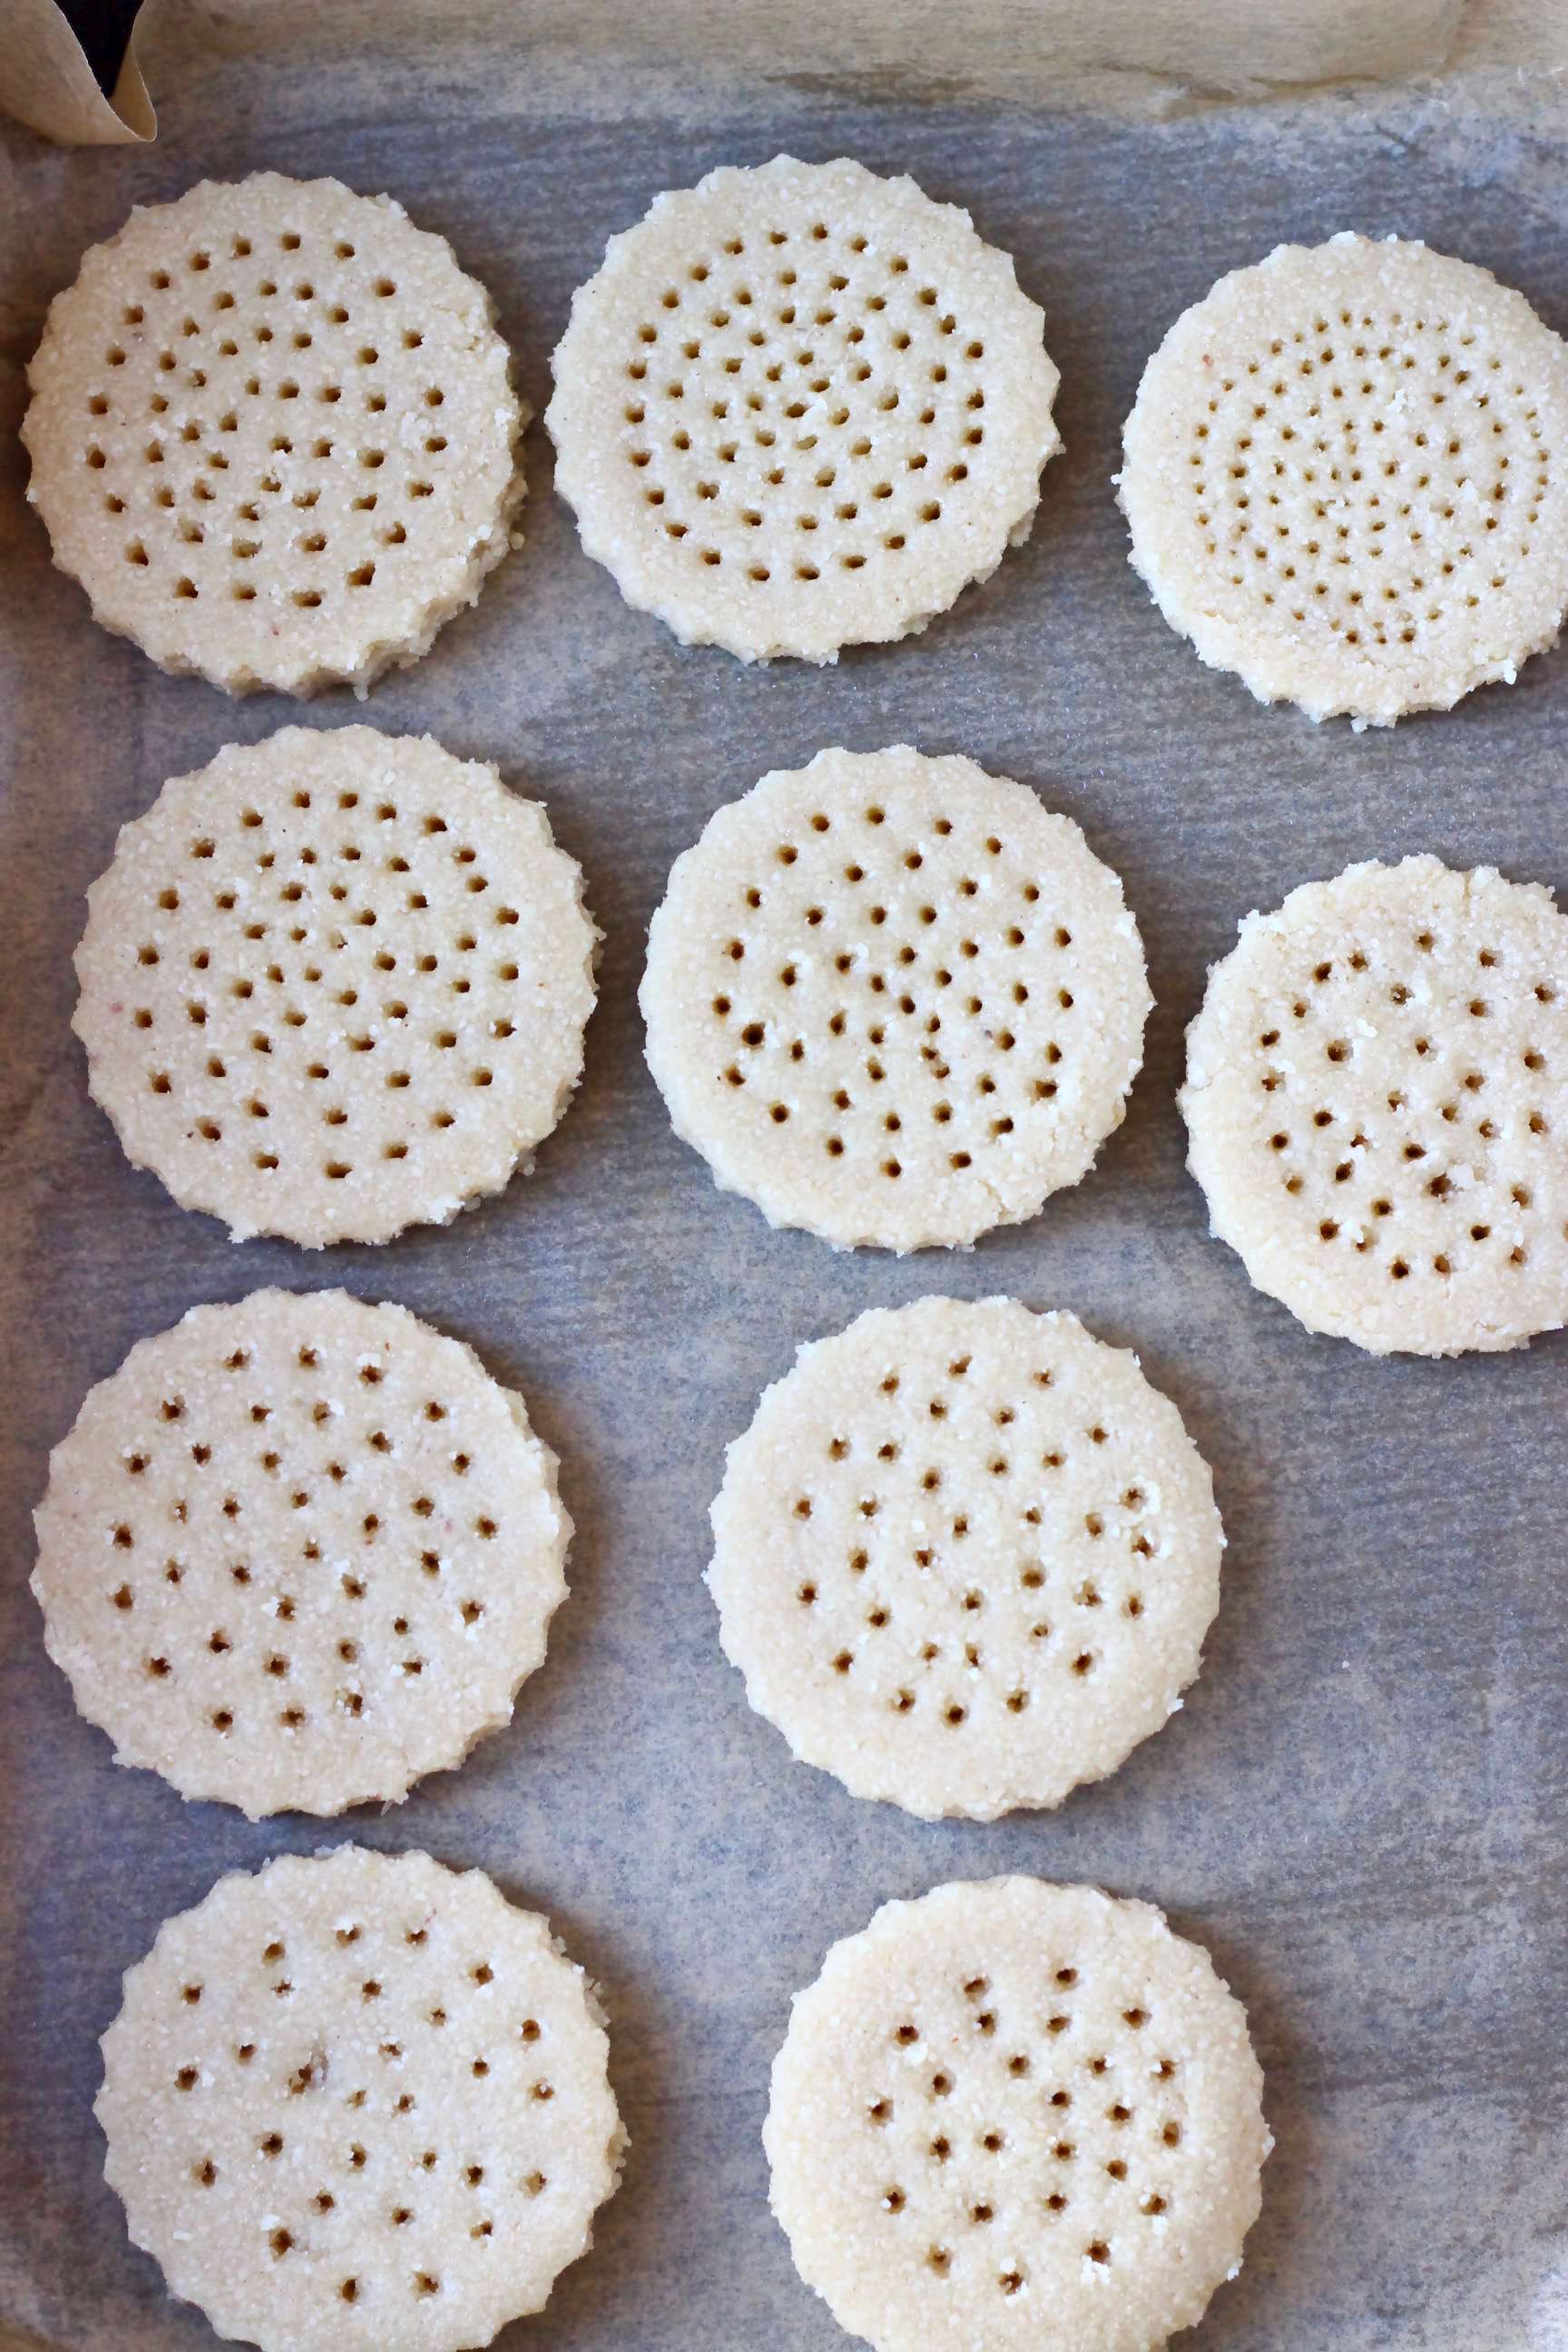 Ten raw vegan shortbread cookies with holes cut out on baking paper